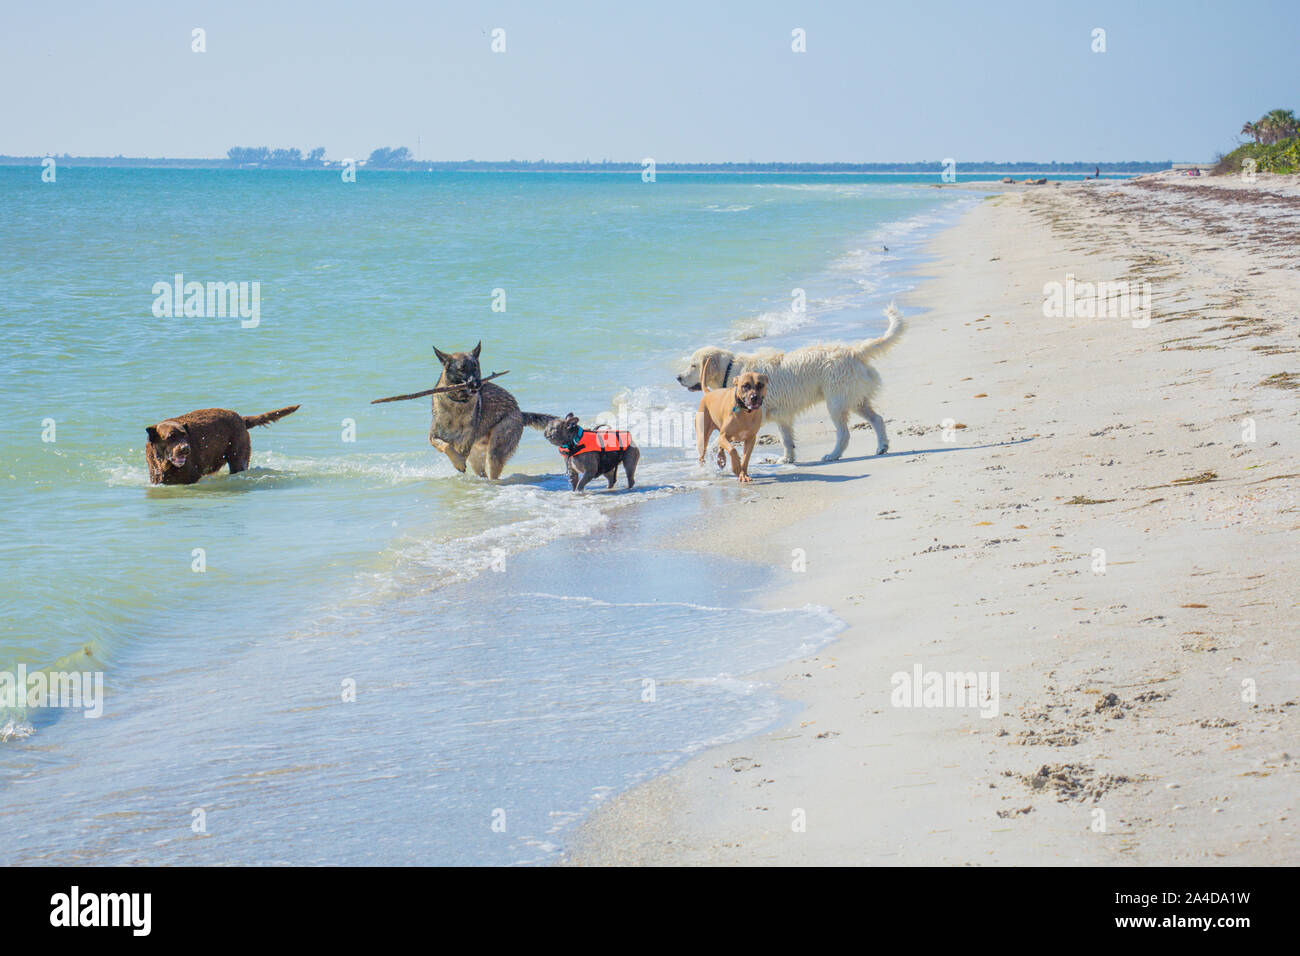 Group of dogs playing in the ocean surf, United States Stock Photo